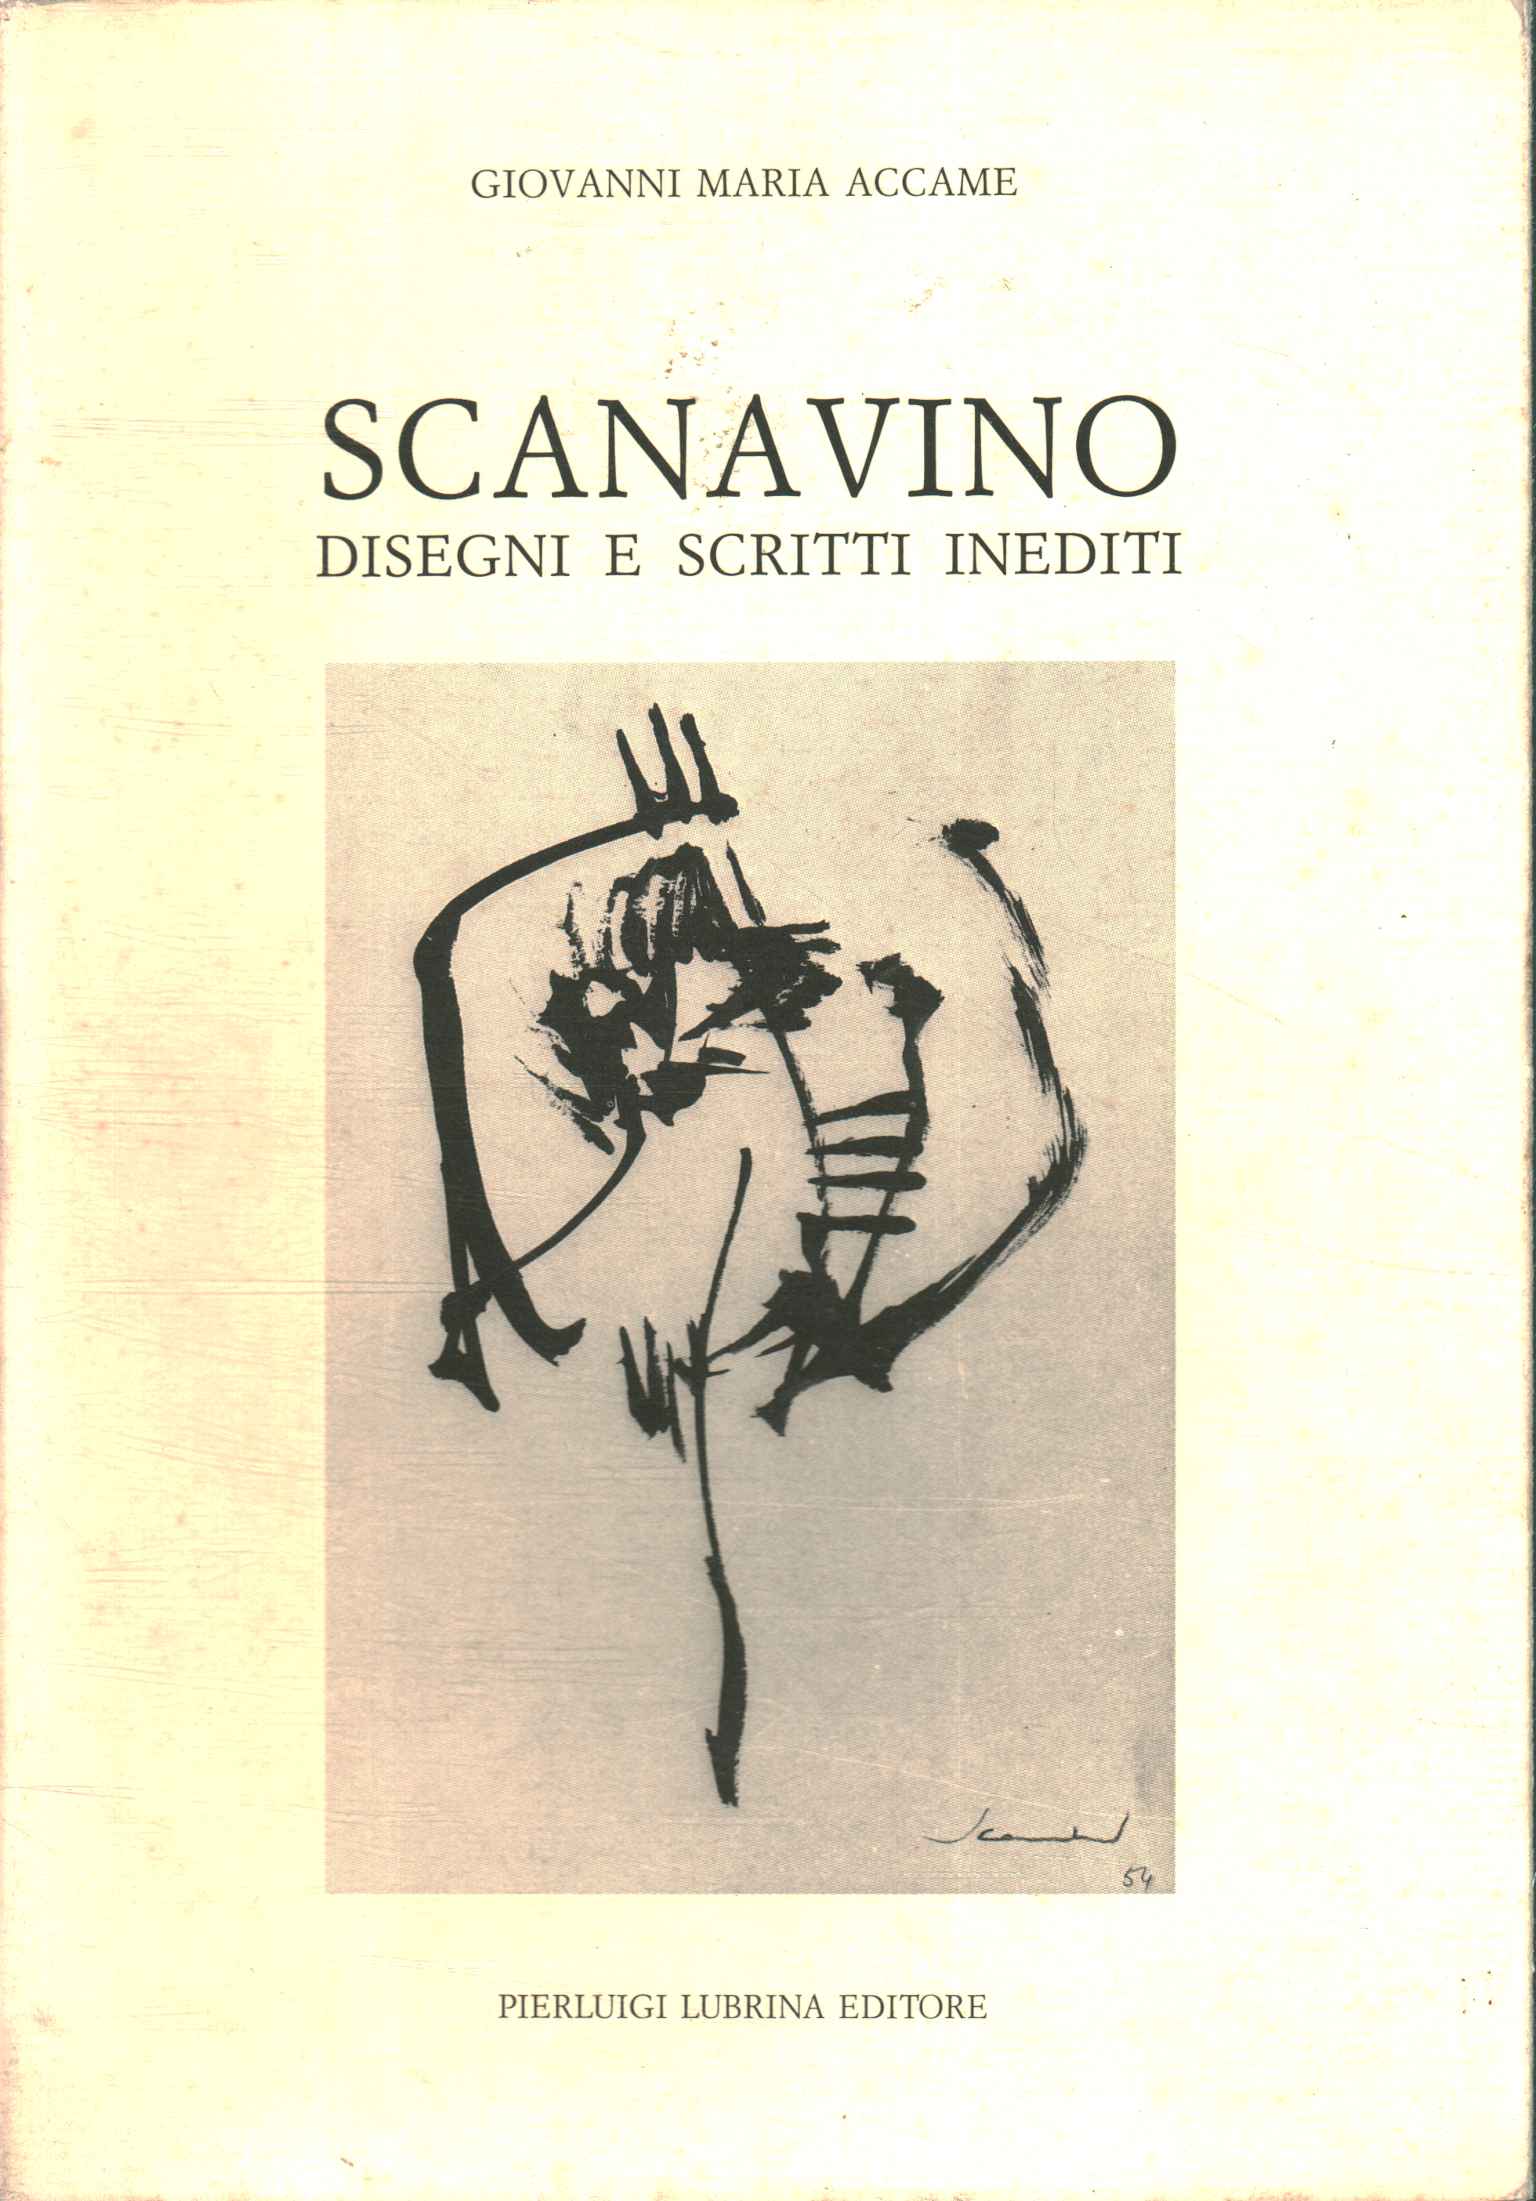 Scanavino. Unpublished drawings and writings